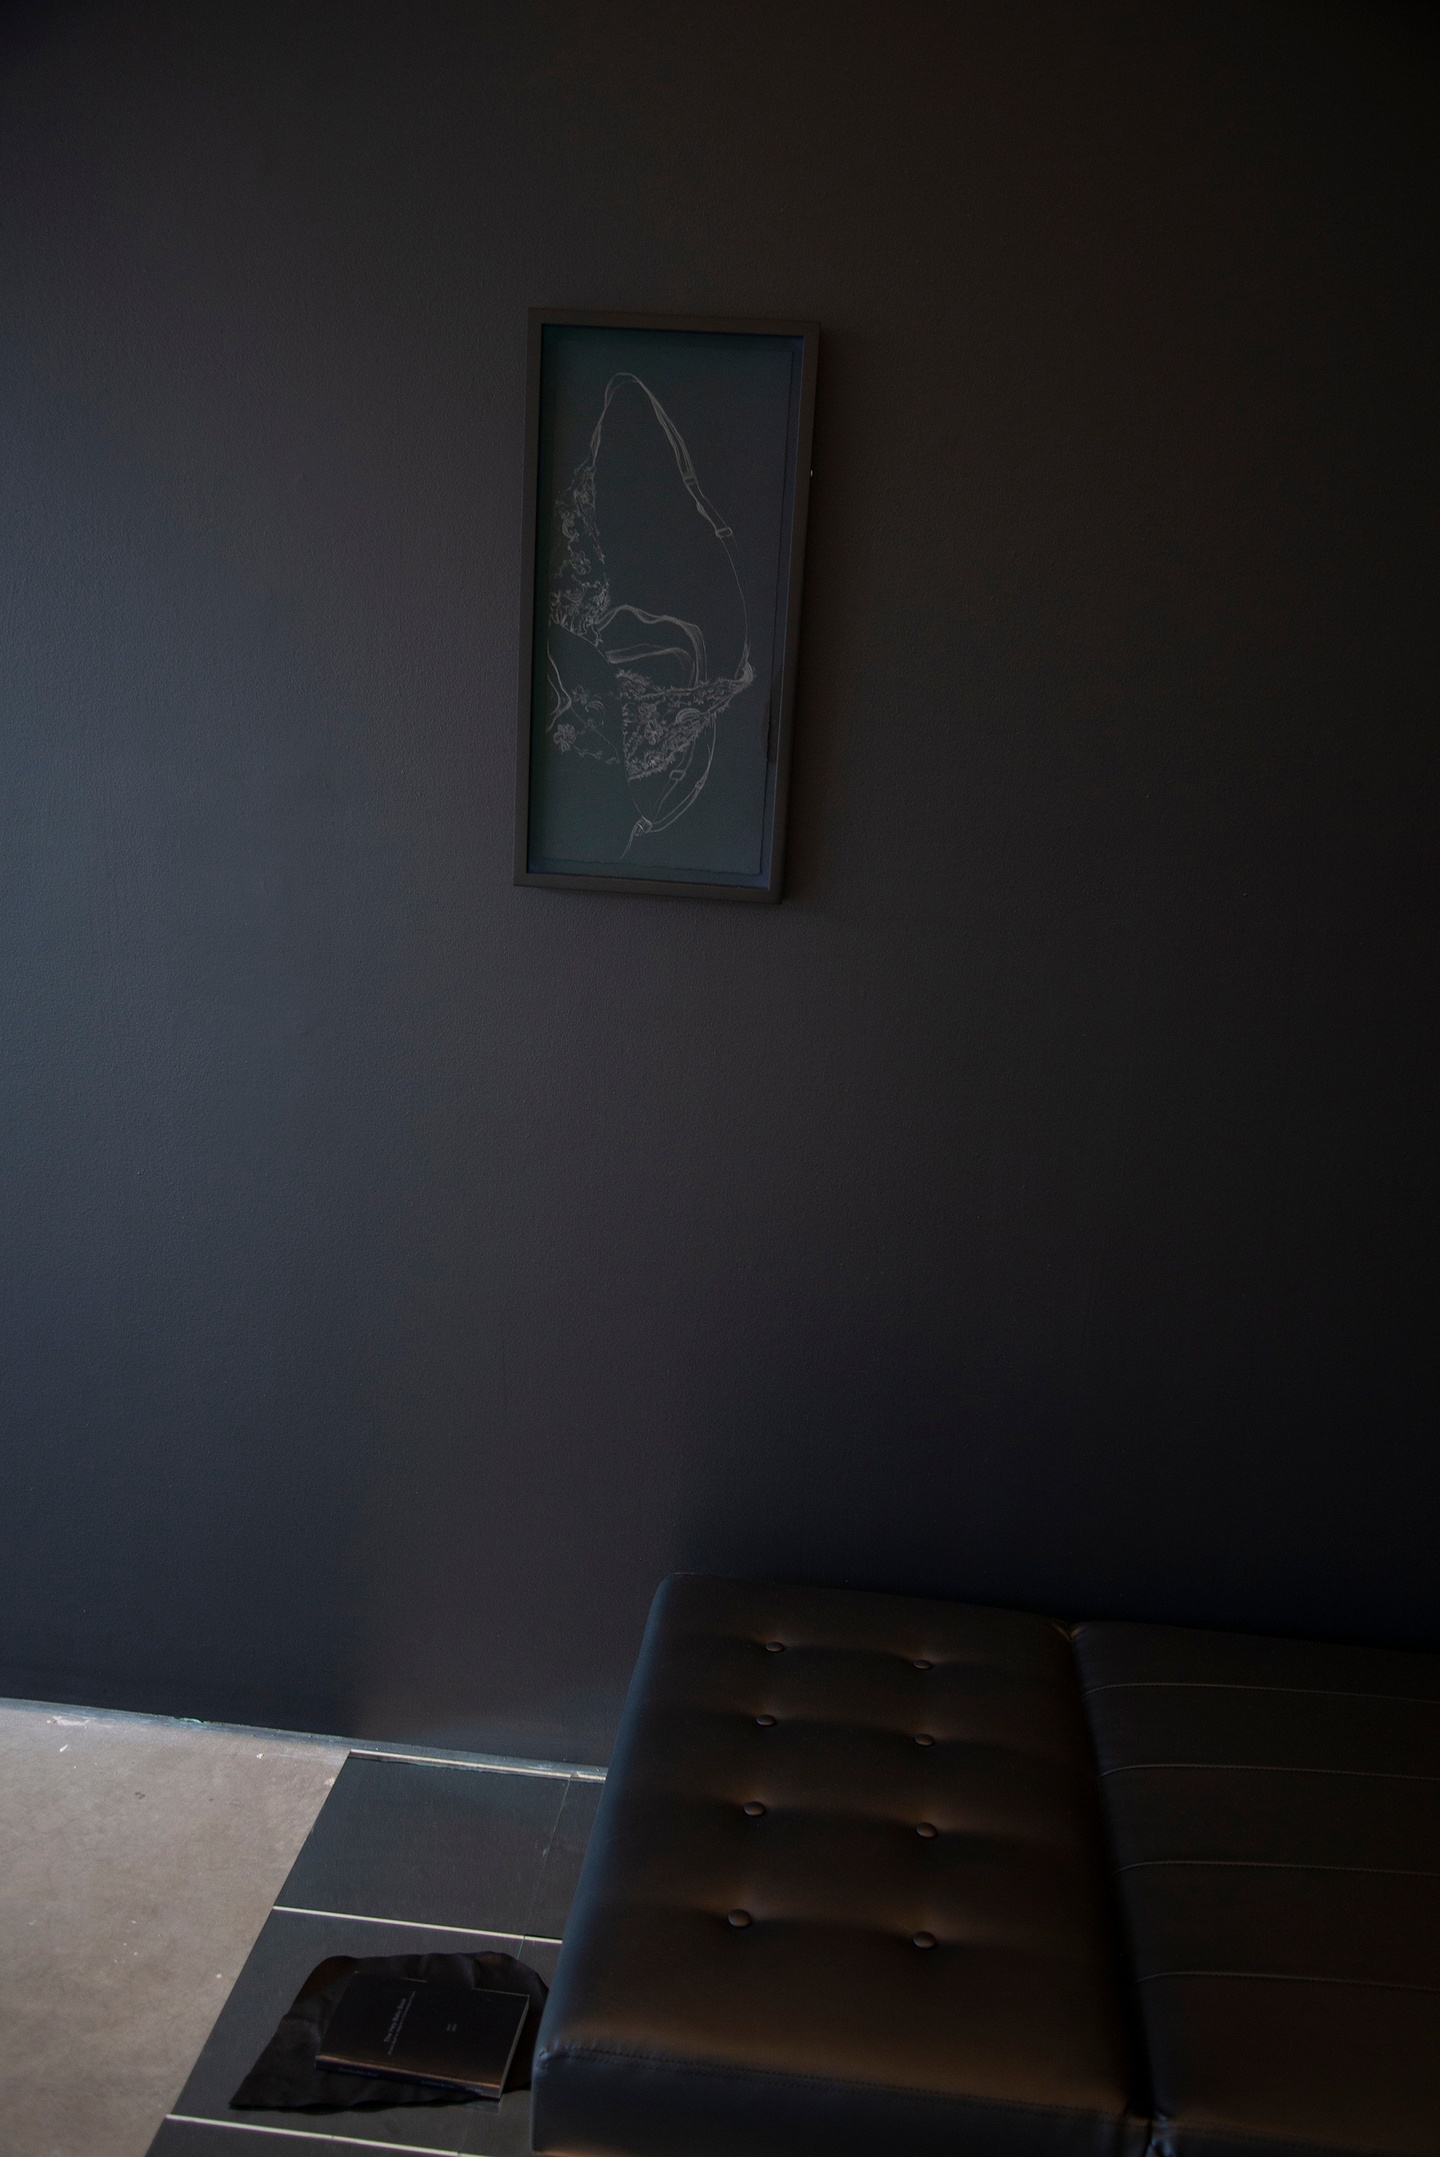 Against a black wall, on a black background in a tall, rectangular black frame, faint white lines that may resemble some kind of clothing or detail. Against the wall is a black bench on a light-hued floor with some reflective, possibly metal panels. On one of the panels is a black book.